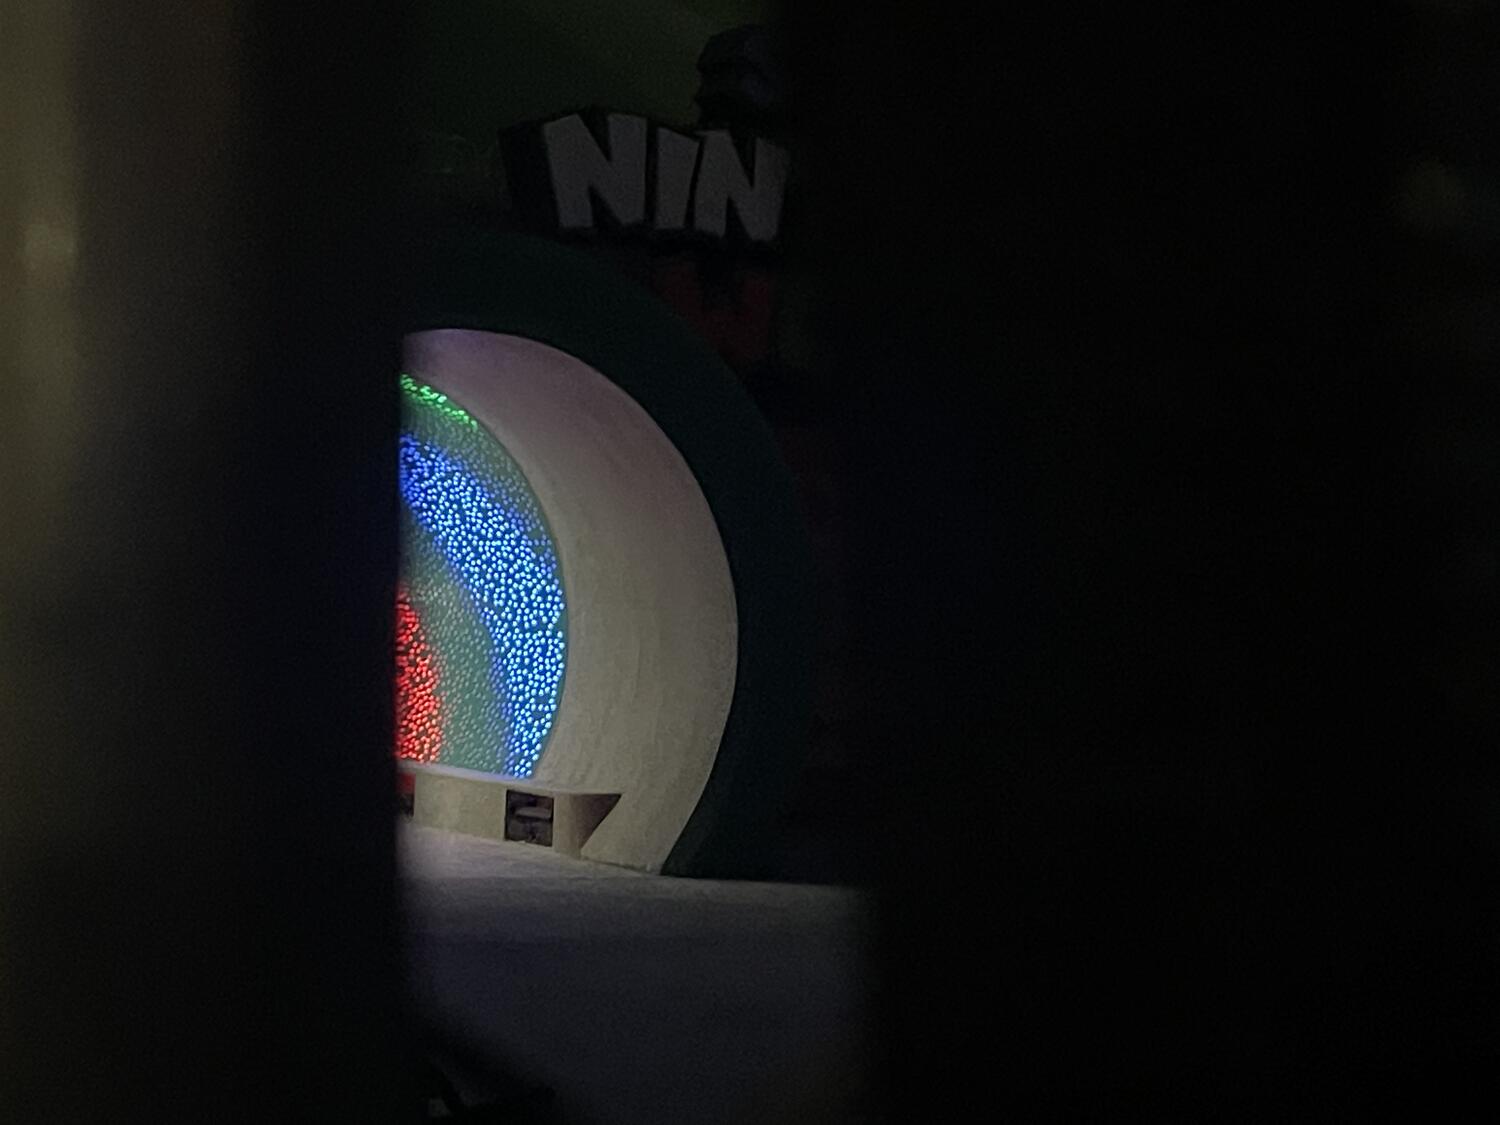 A peek at the entrance to Super Nintendo Land through a fence. The green warp pipe is lit up on the inside with colorful lights.